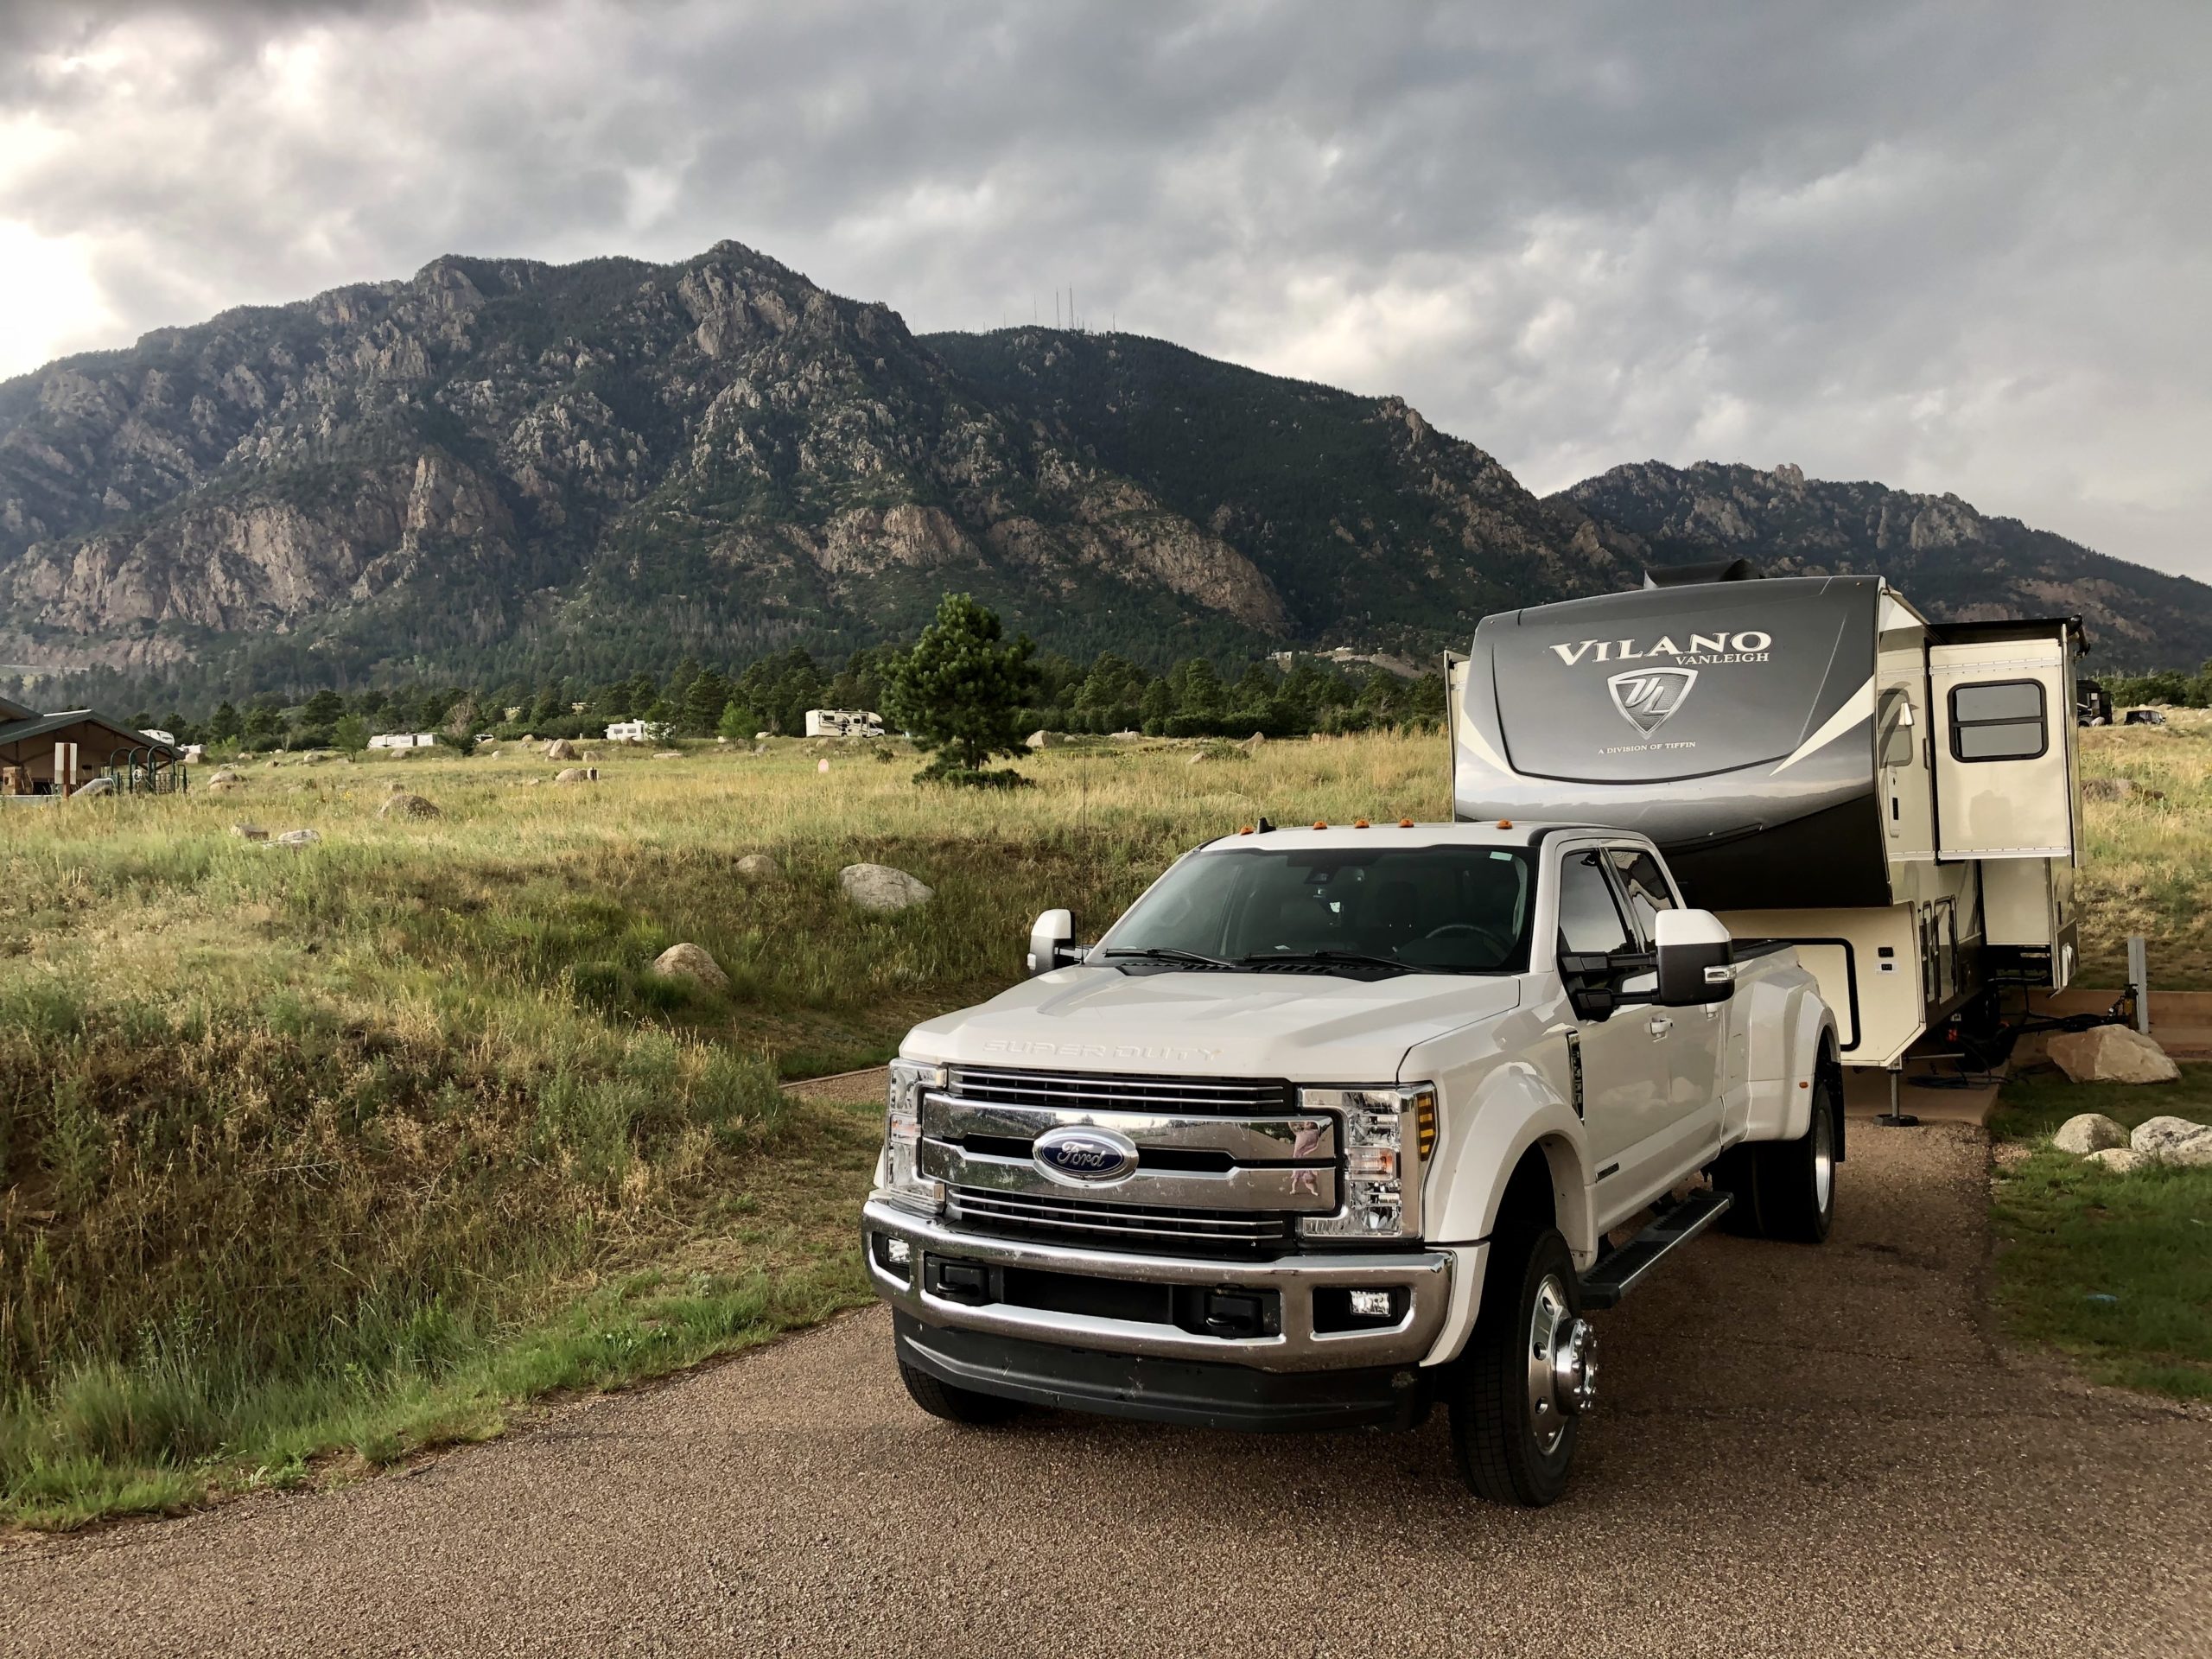 A Ford truck parked in front of a fifth wheel with its slides out against a mountain backdrop